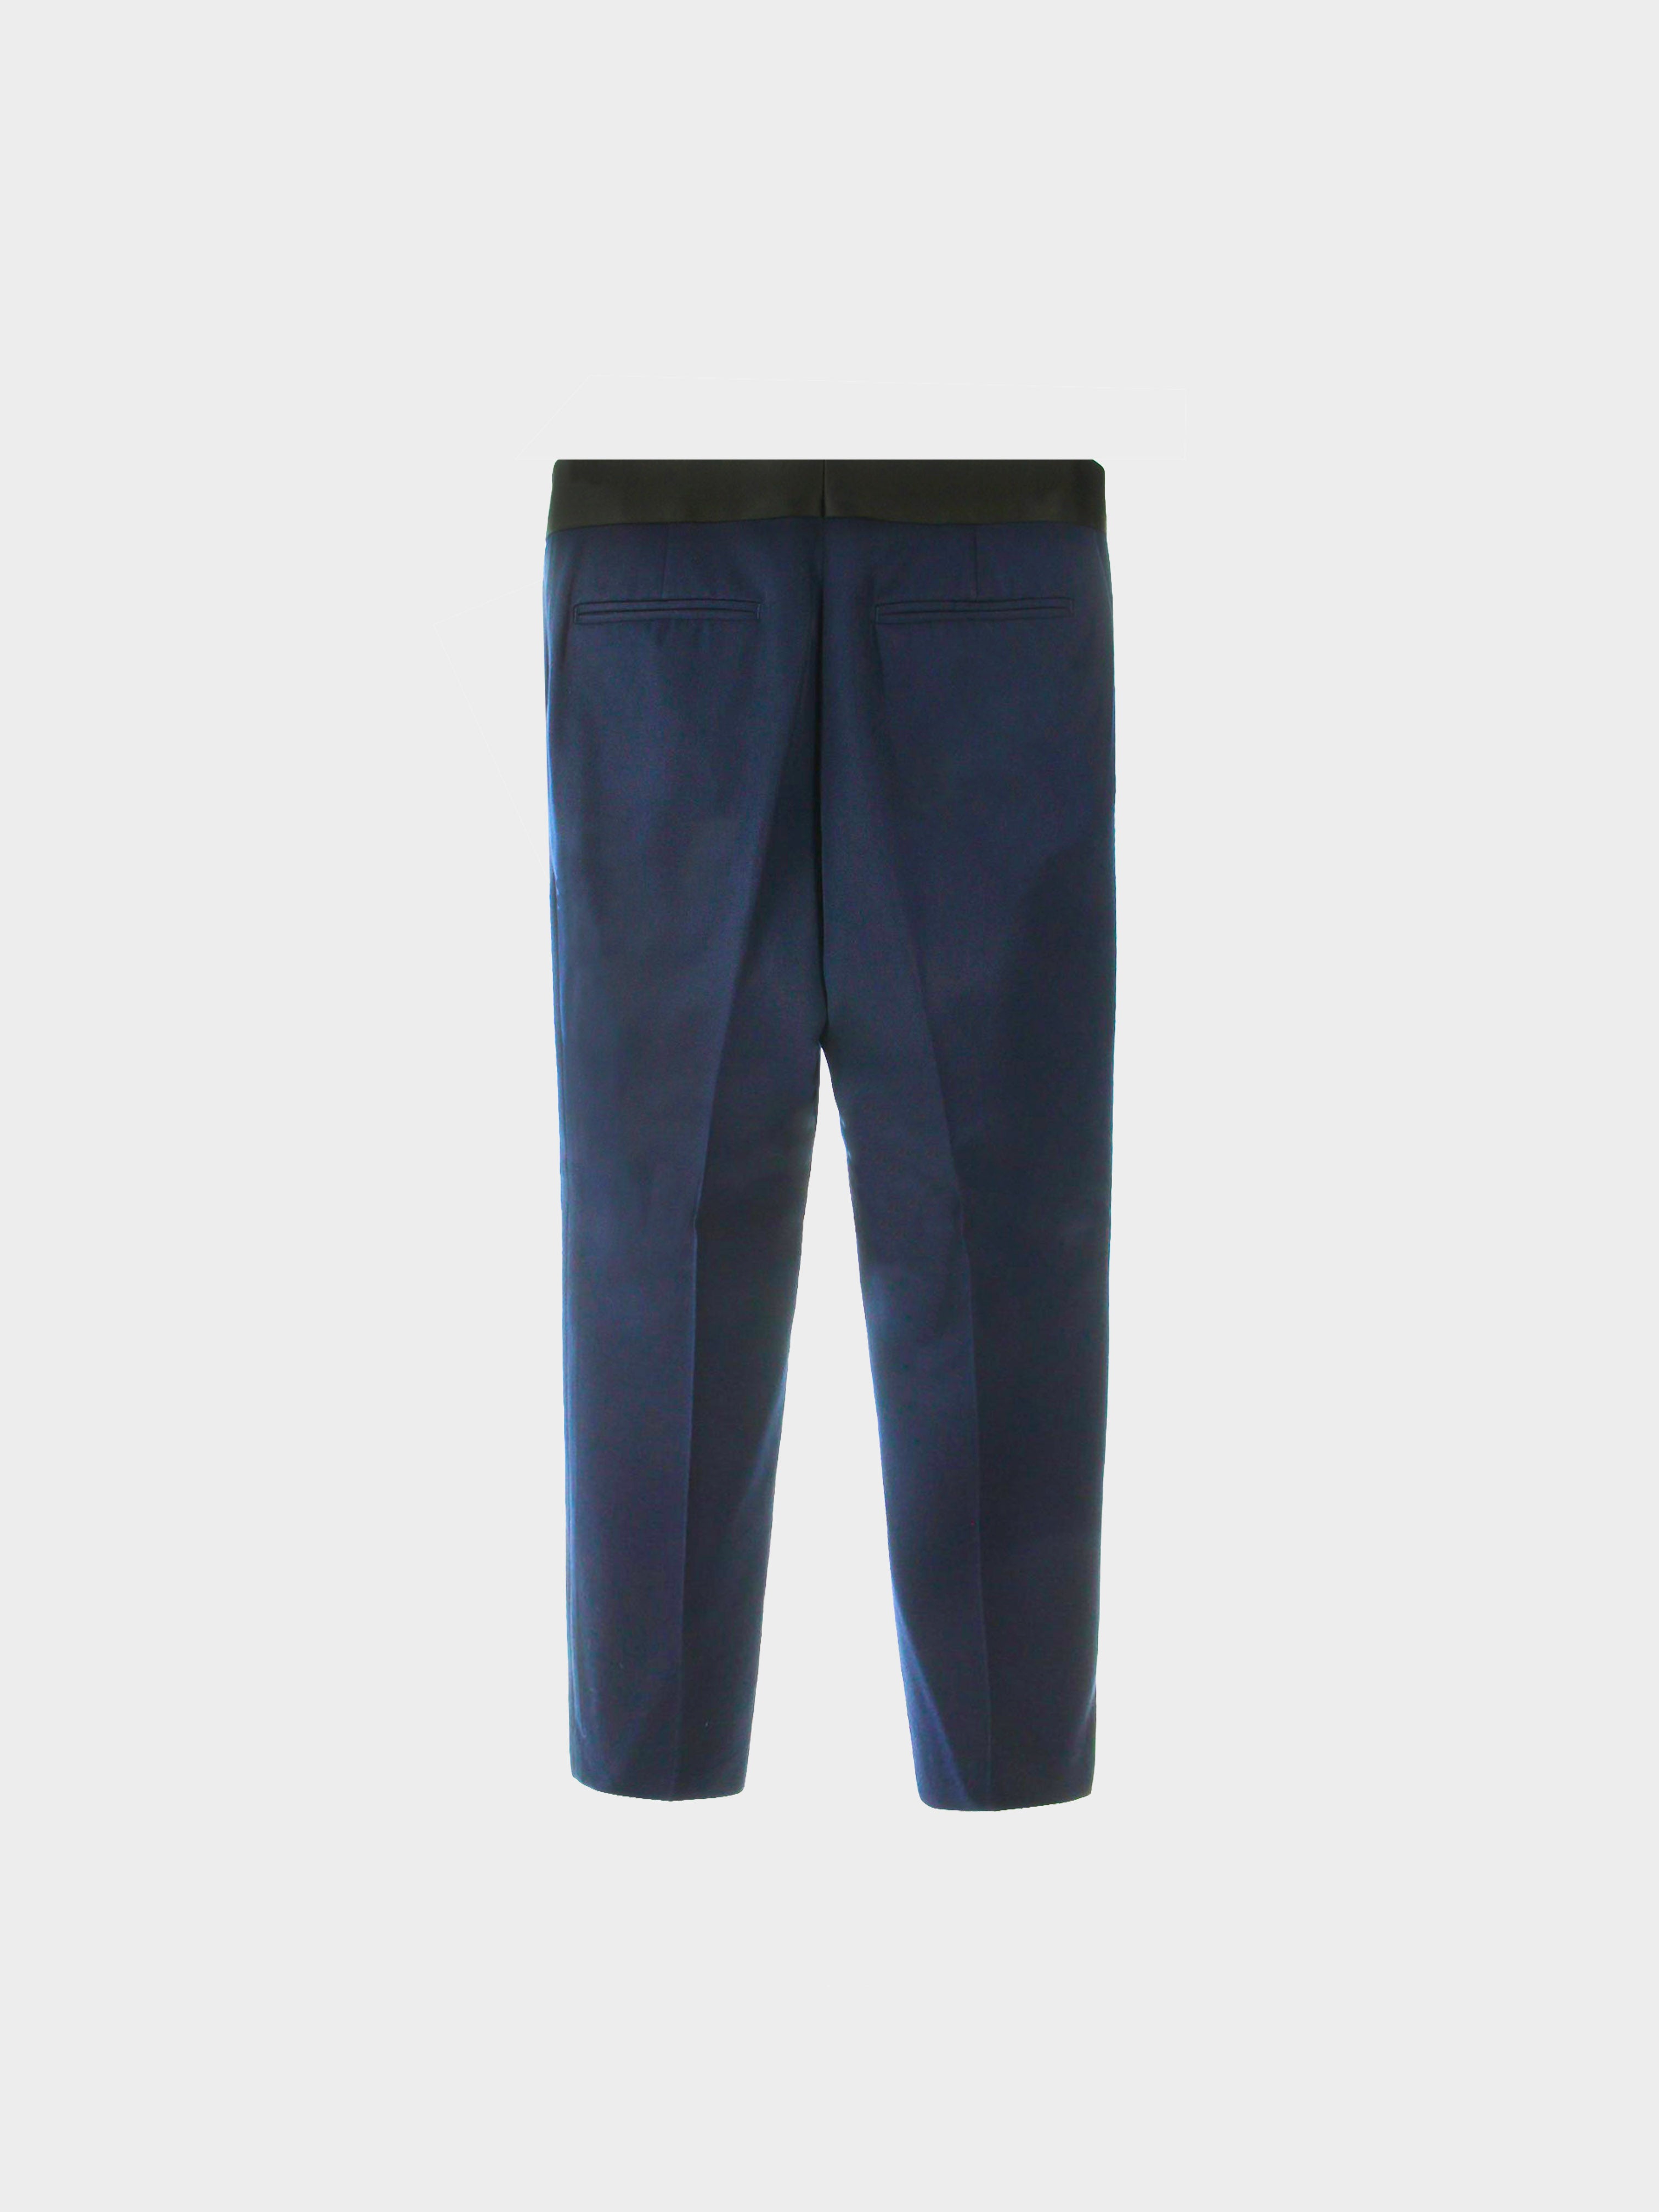 Céline by Phoebe Philo 2000s Navy Blue Stovepipe Trousers